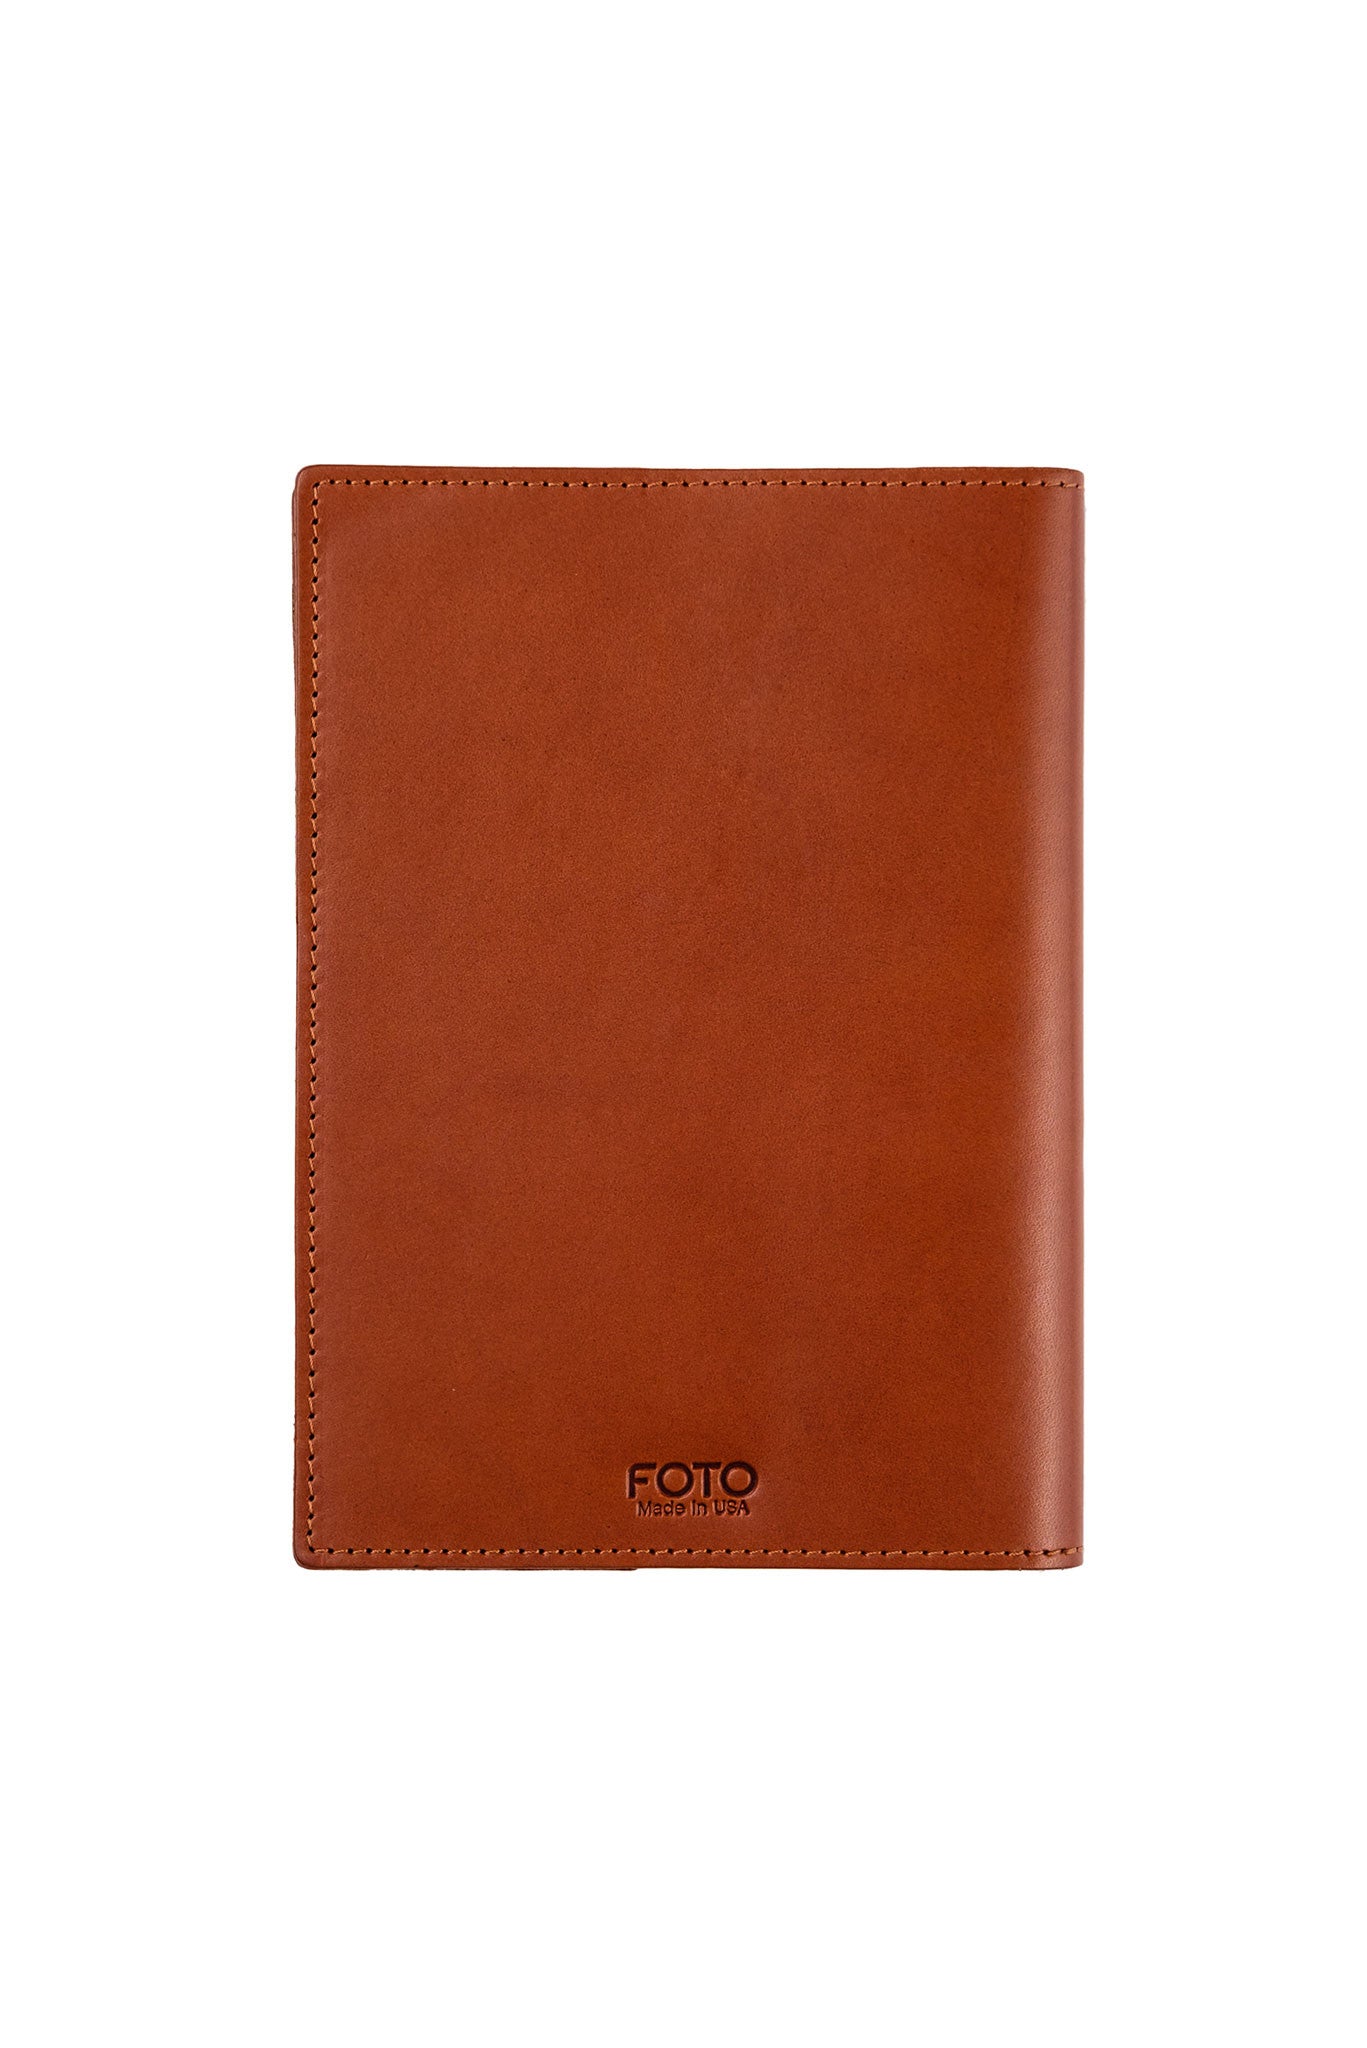 FOTO | Cognac Leather Journal - refillable genuine leather journal cover can be personalized with gold foil initials, a monogram or business logo making it the perfect personalized gift. 